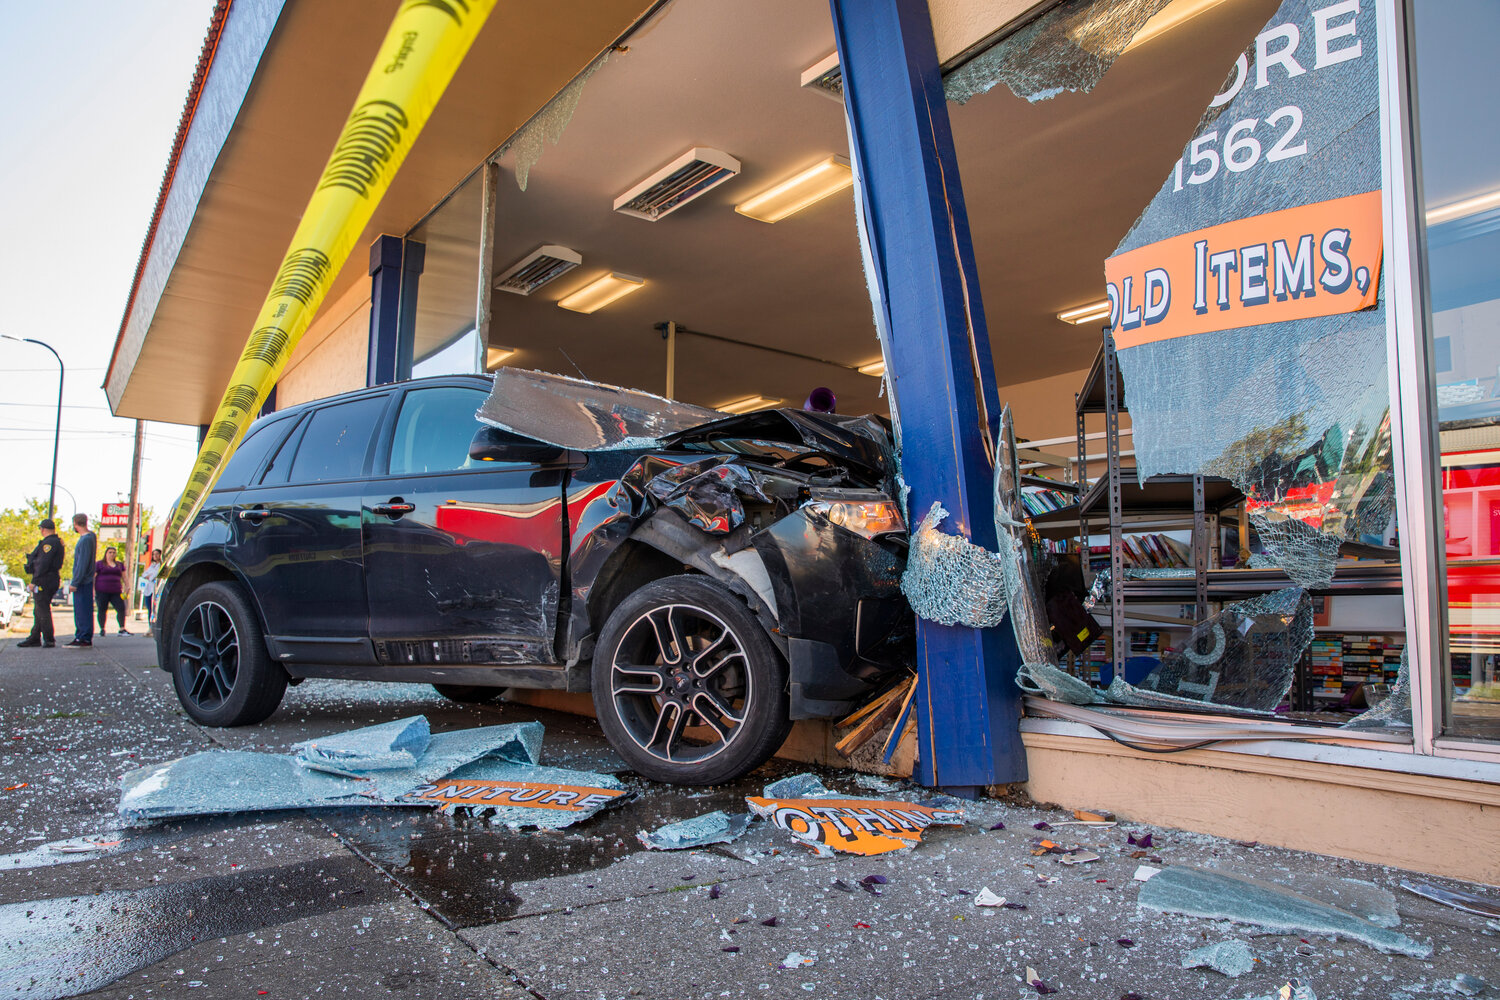 Caution tape surrounds a scene at Visiting Nurses in Centralia after a vehicle crashed through windows, destroying shelves full of items, at the location Thursday morning.